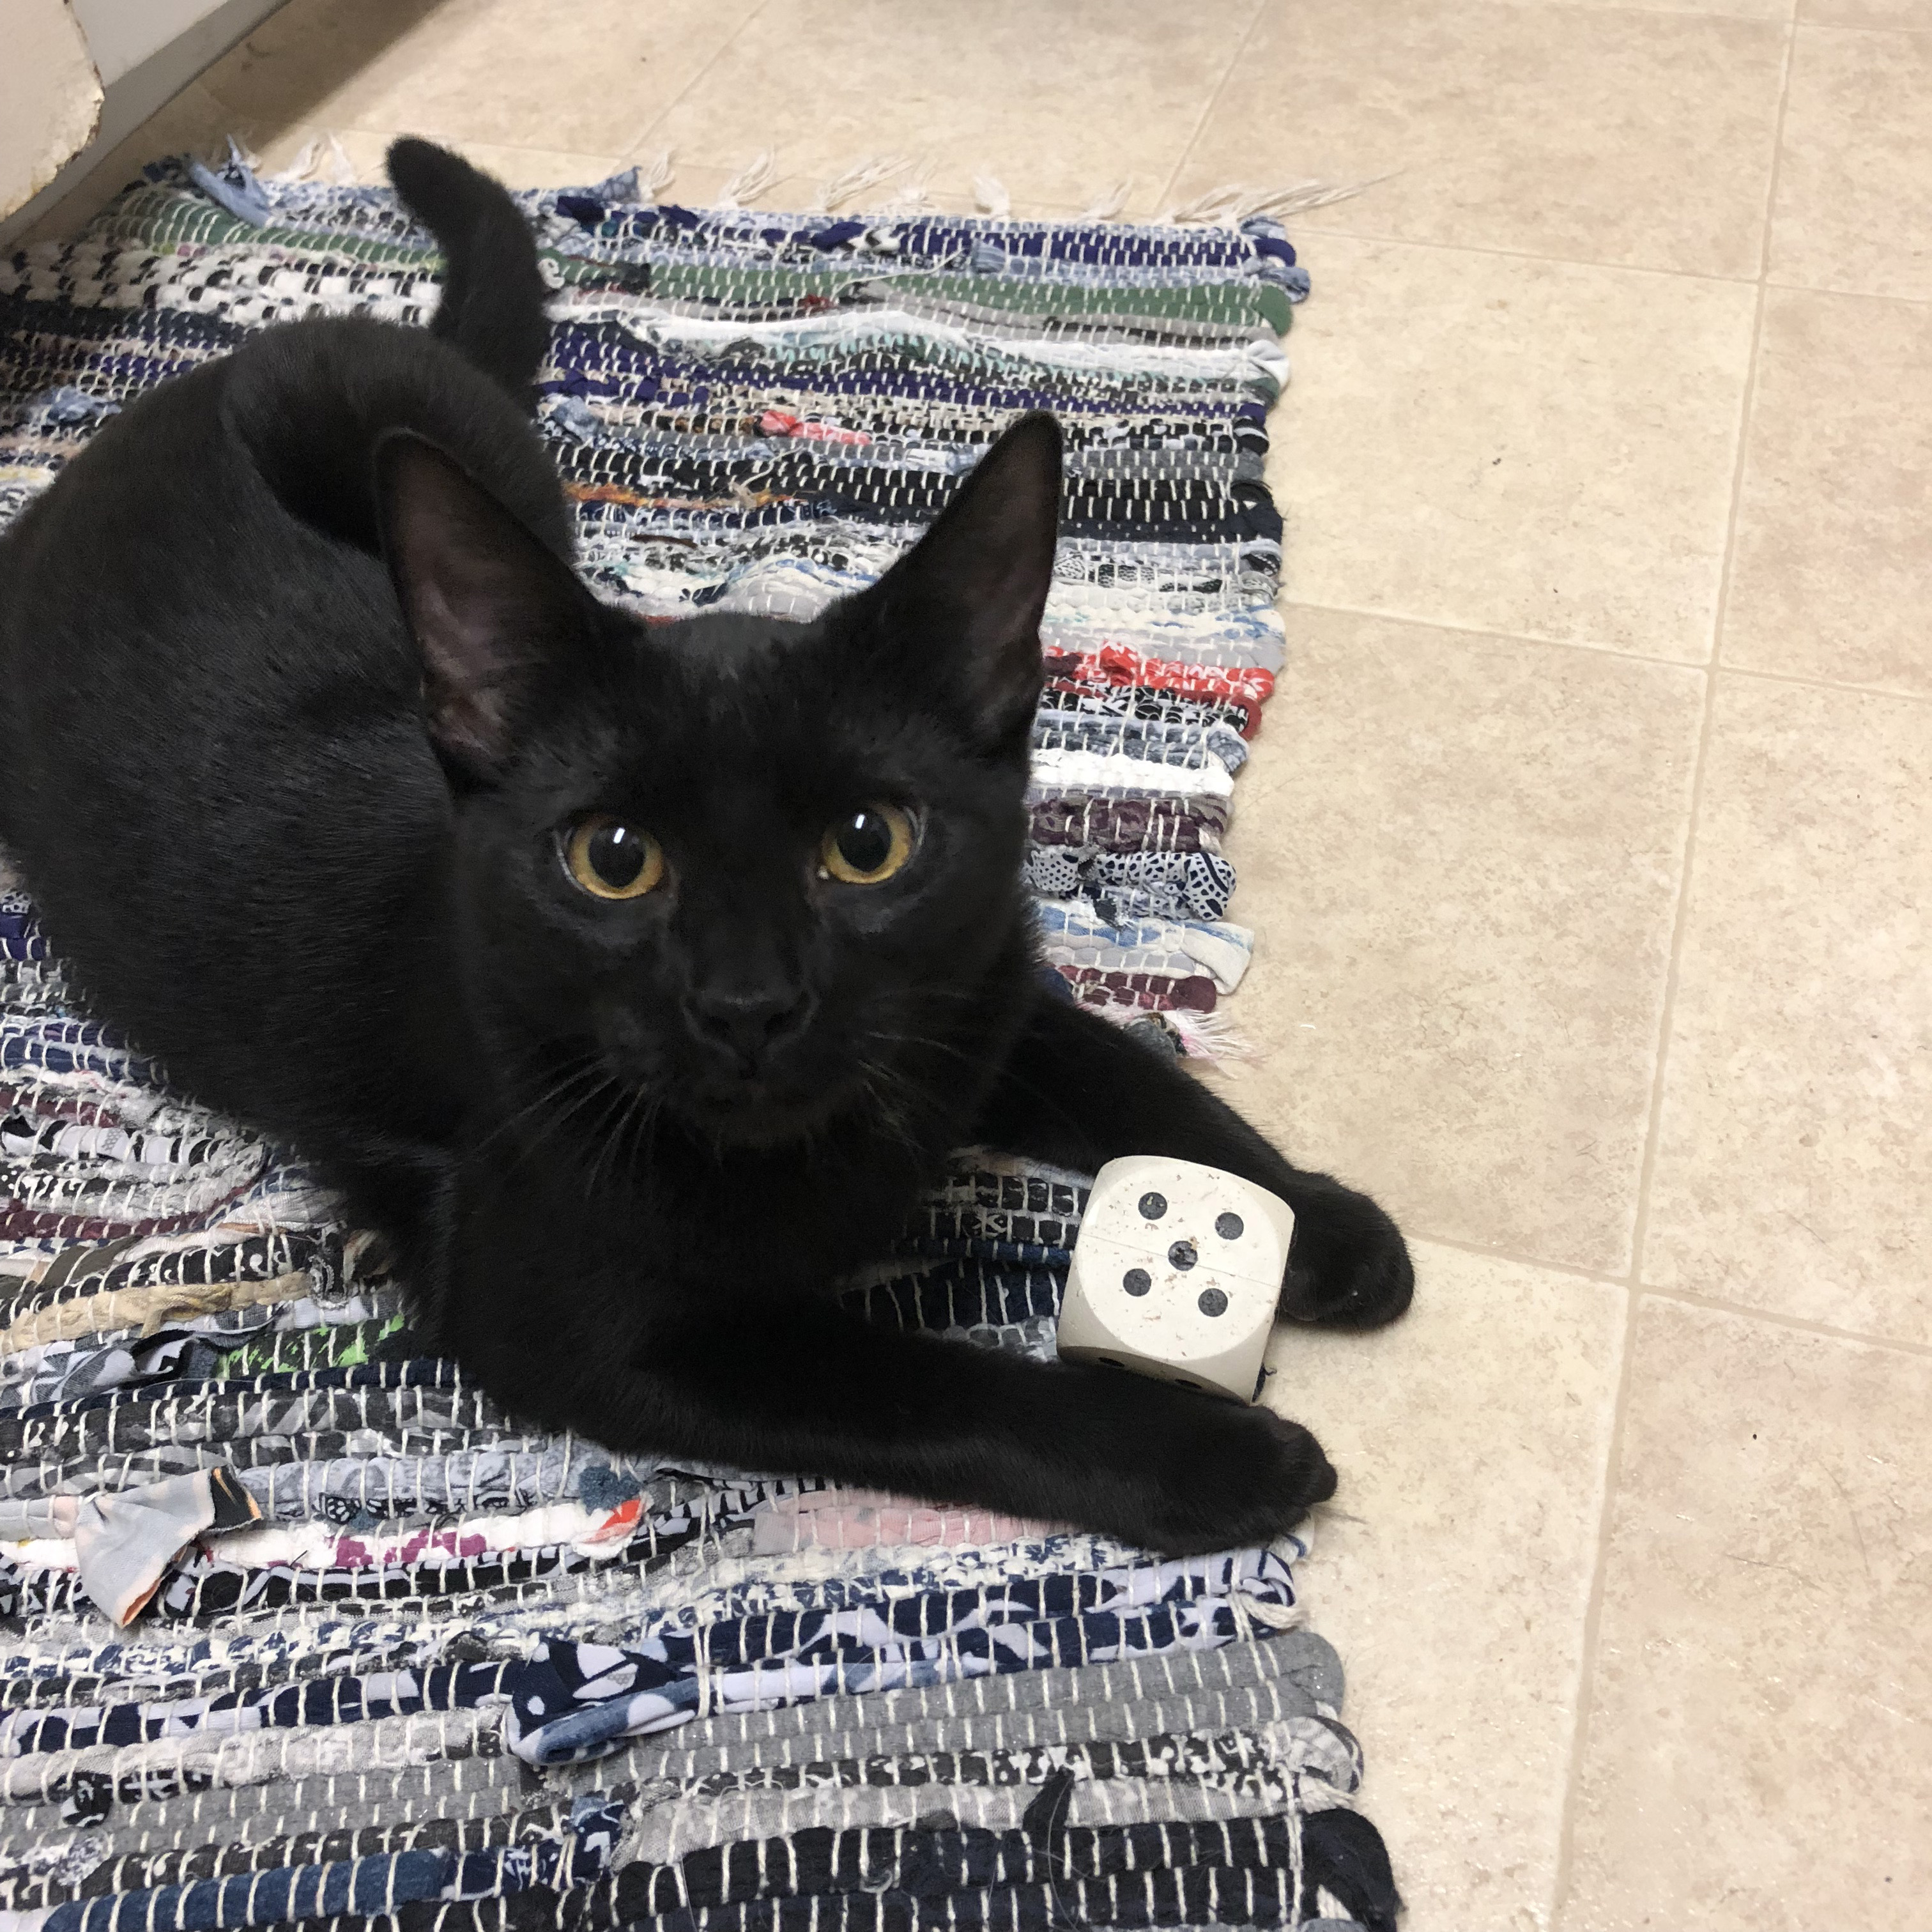 A black kitten with a 6-sided die.